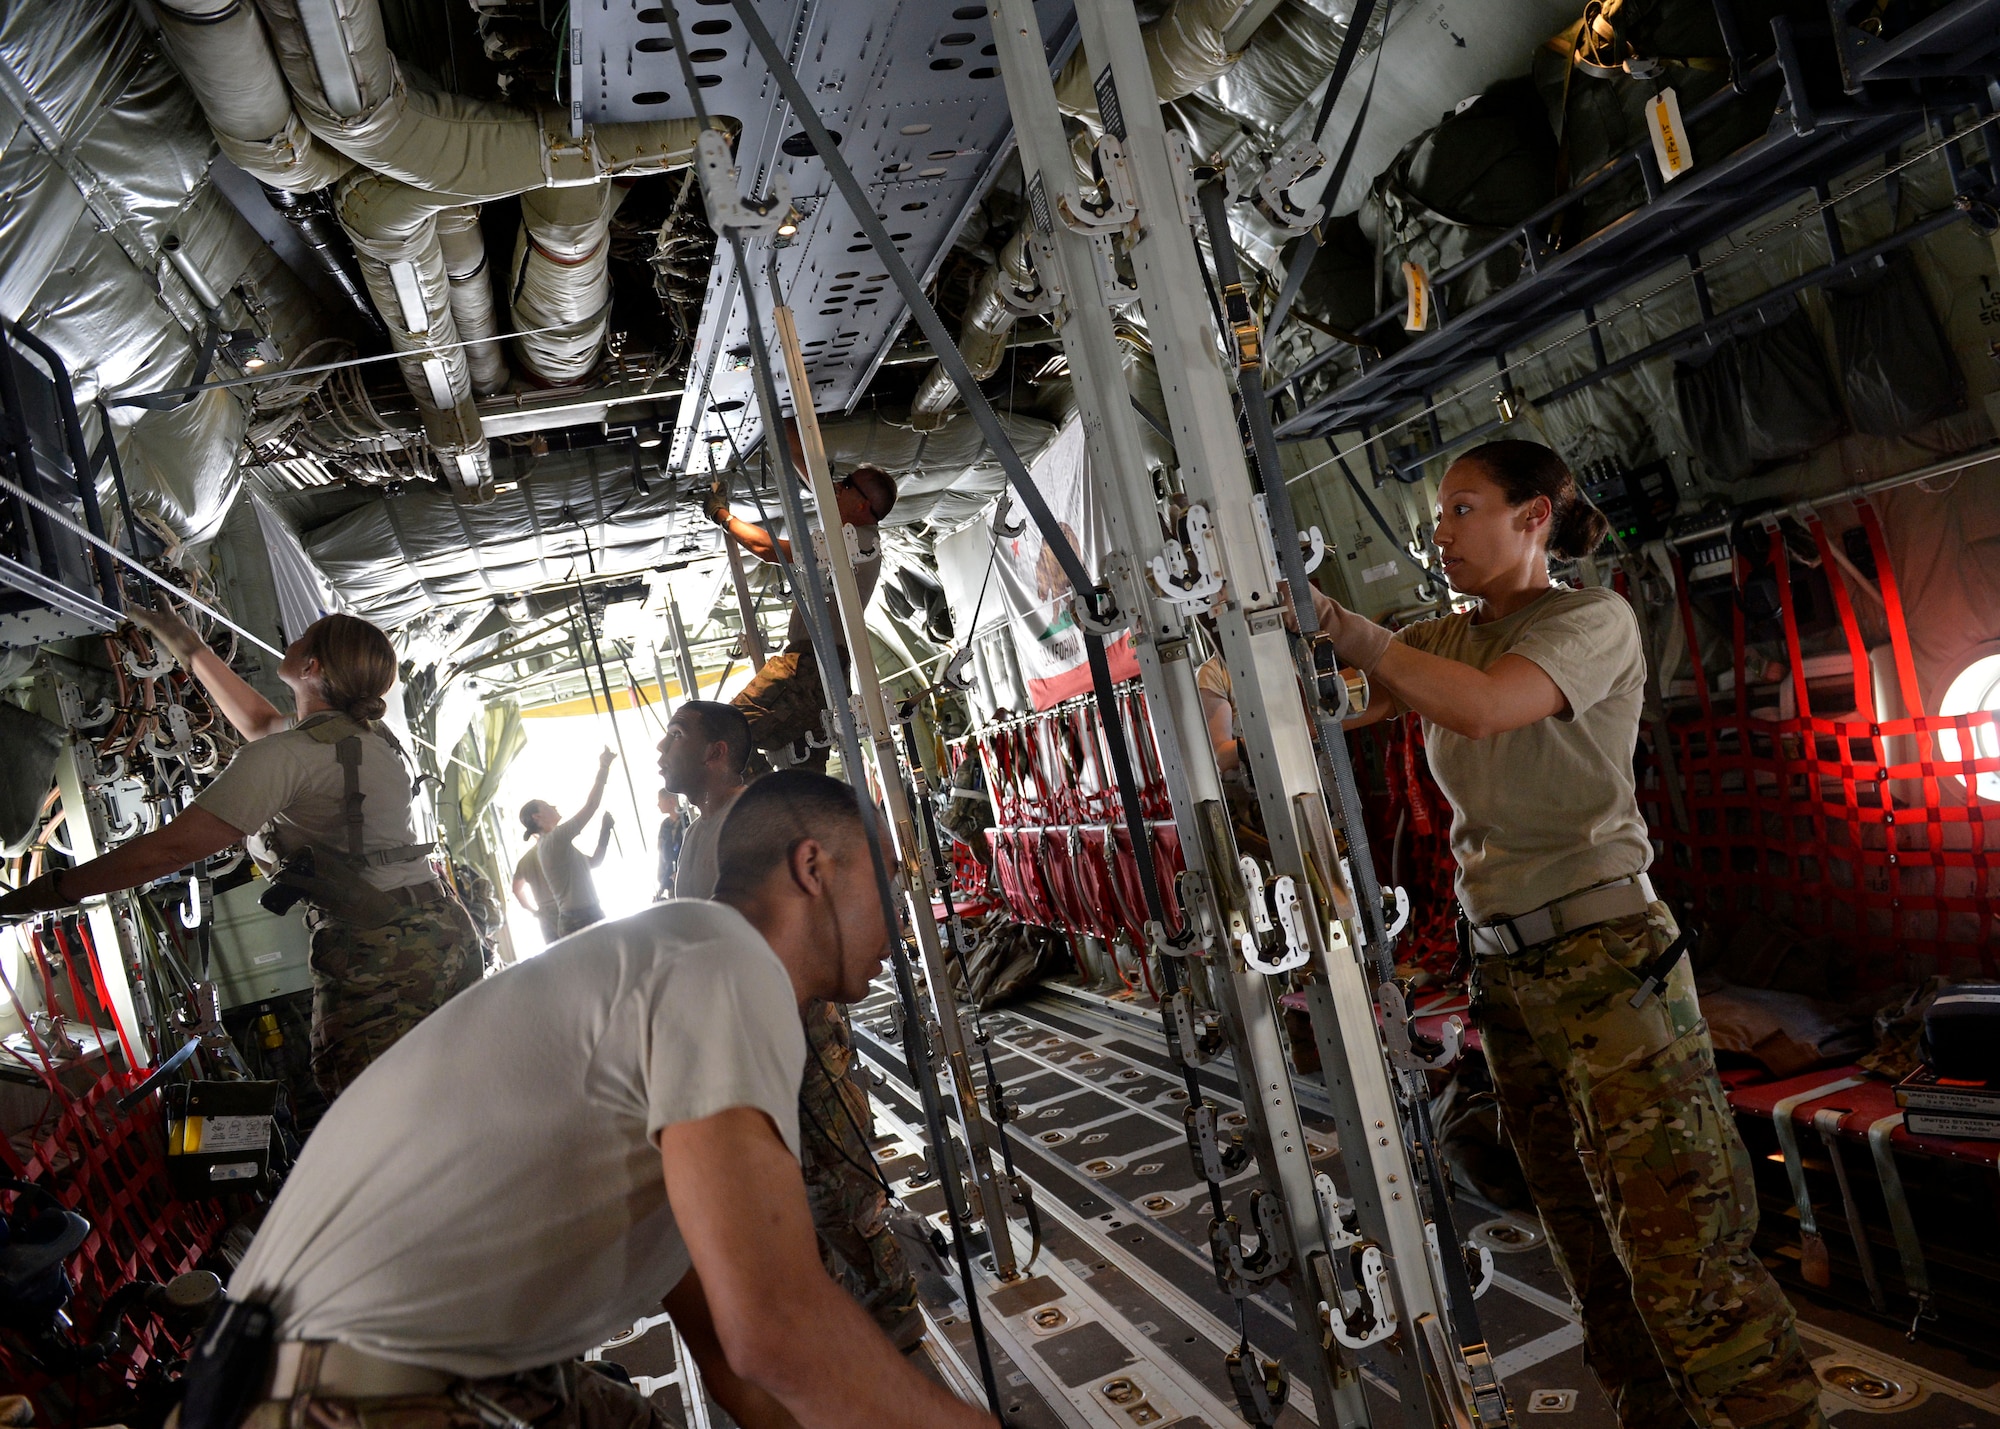 Airmen prepare a C-130J Super Hercules aircraft for patient transportation at Bagram Airfield. . The unit uses fixed-wing aircraft such as the C-130J Super Hercules, which allows larger patient loads, long-distance transportation and a greater ability to care for injured members (Air Force photo).  